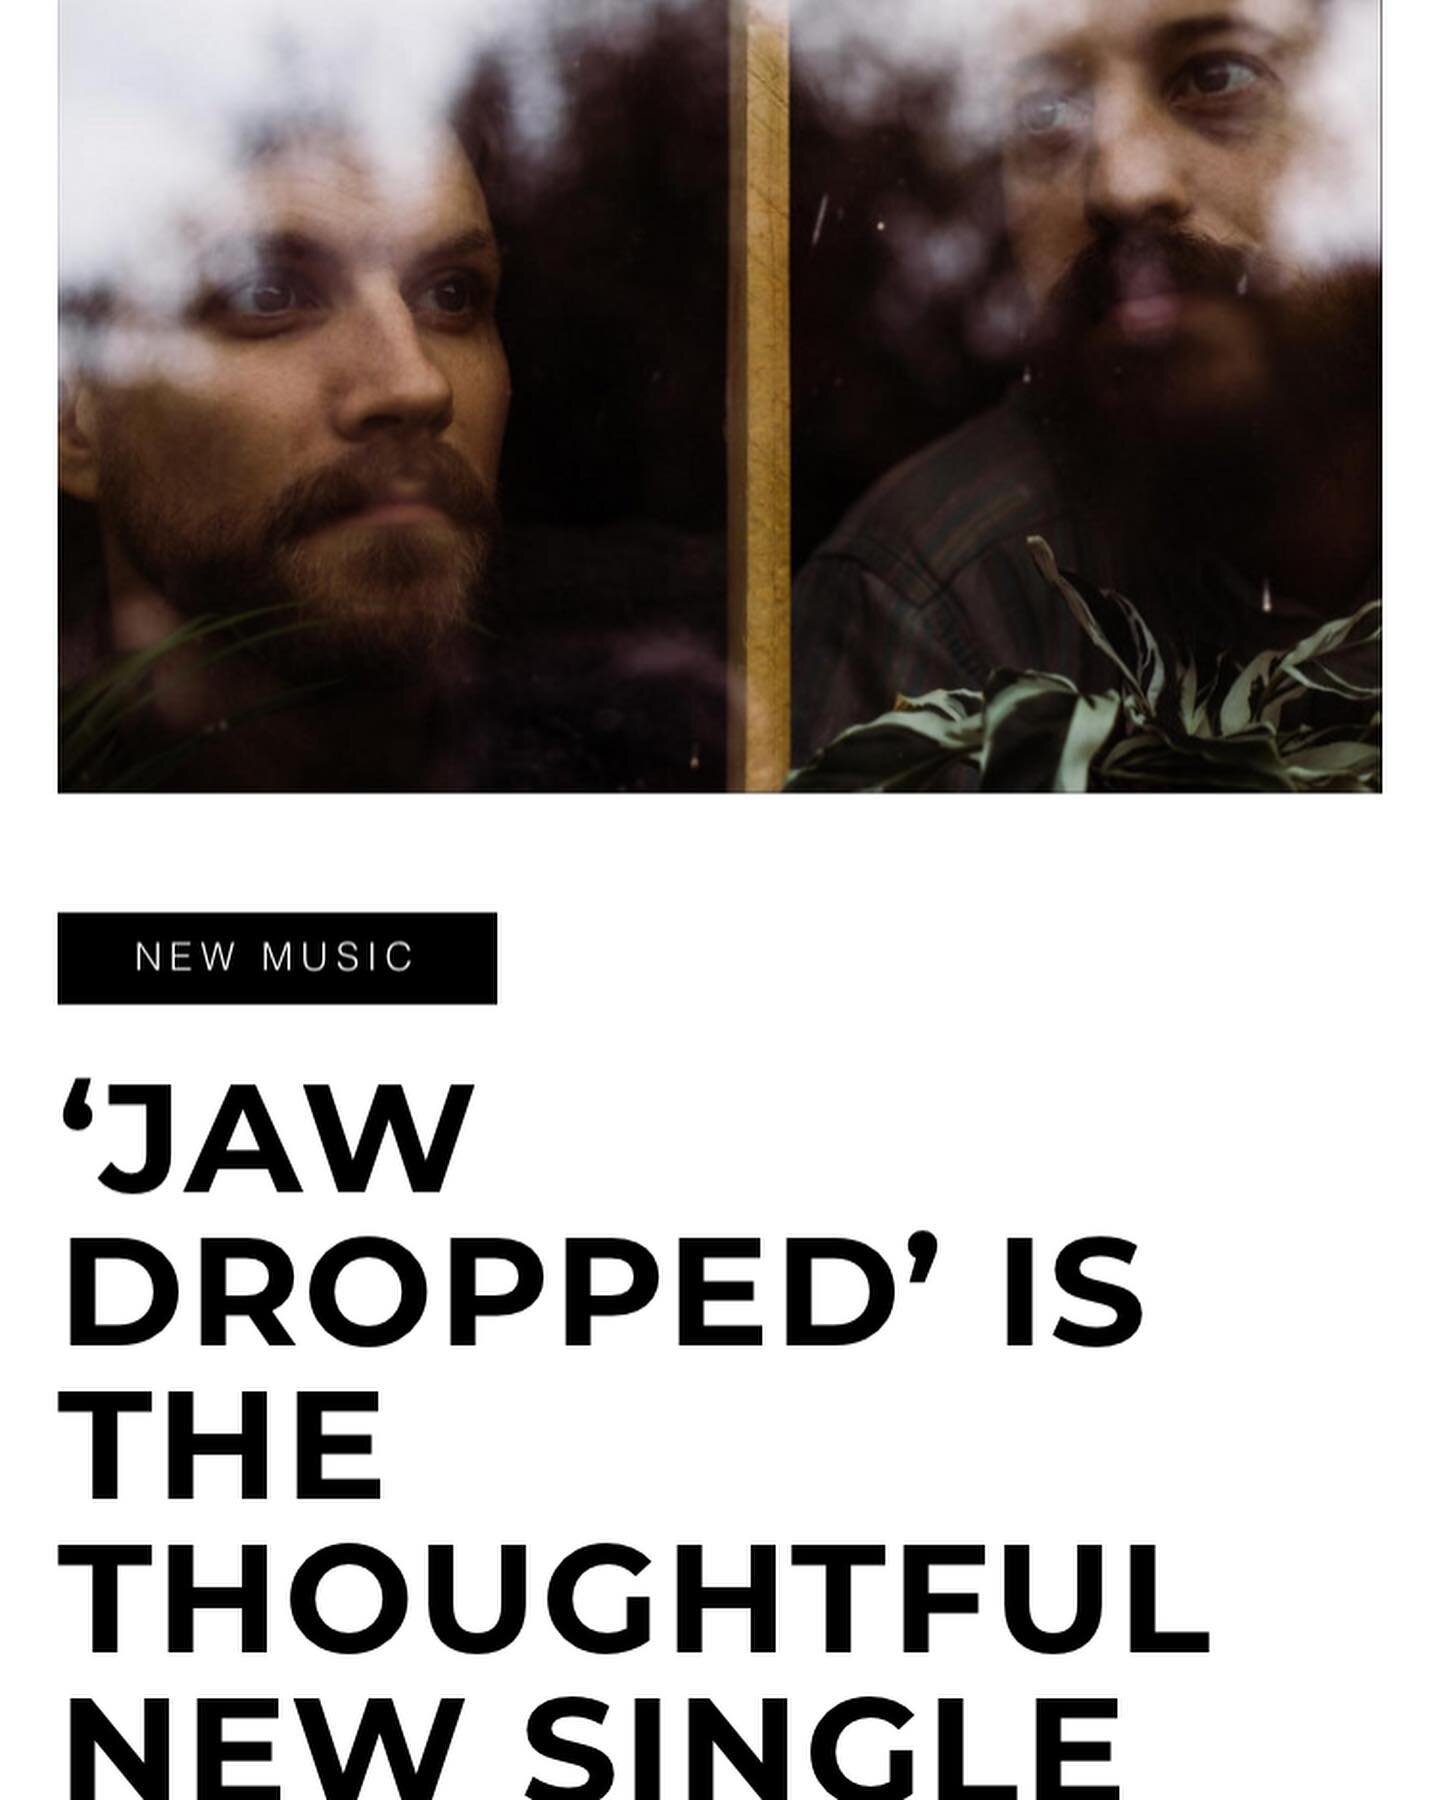 Thanks to Clout blog for the nice write up on our new single. More music coming soon!
.
.
.

#seattlemusic #recording #newalbum #newsong #music #newmusic #seattlemusicscene #seattlemusicians #bandsofinstagram #seattleartist #pnwartist #indiemusician 